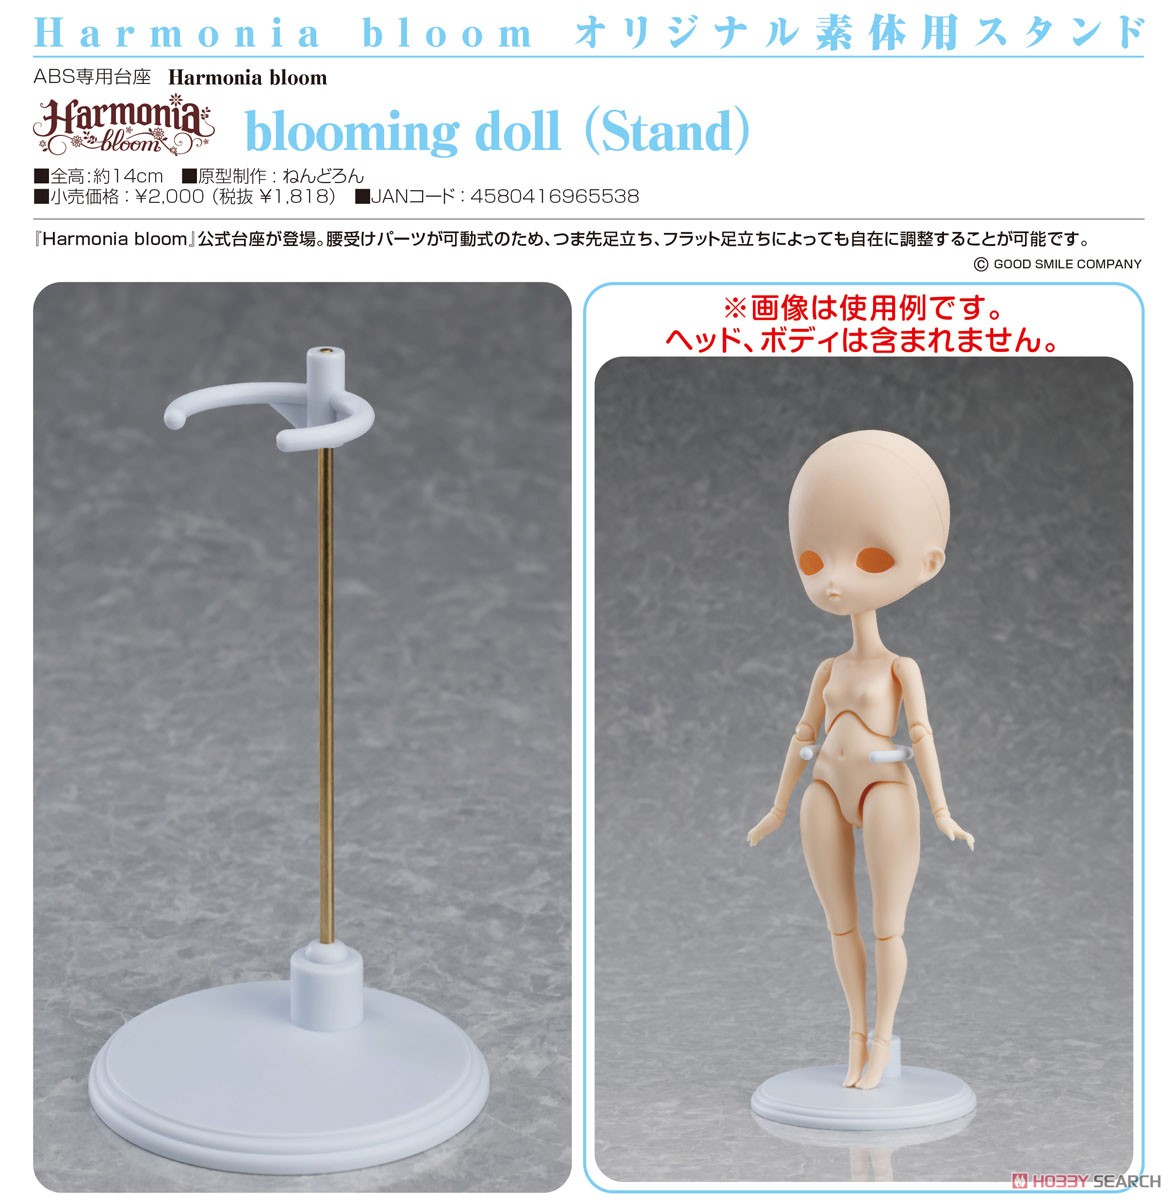 Harmonia bloom blooming doll (Stand) (ドール) その他の画像2